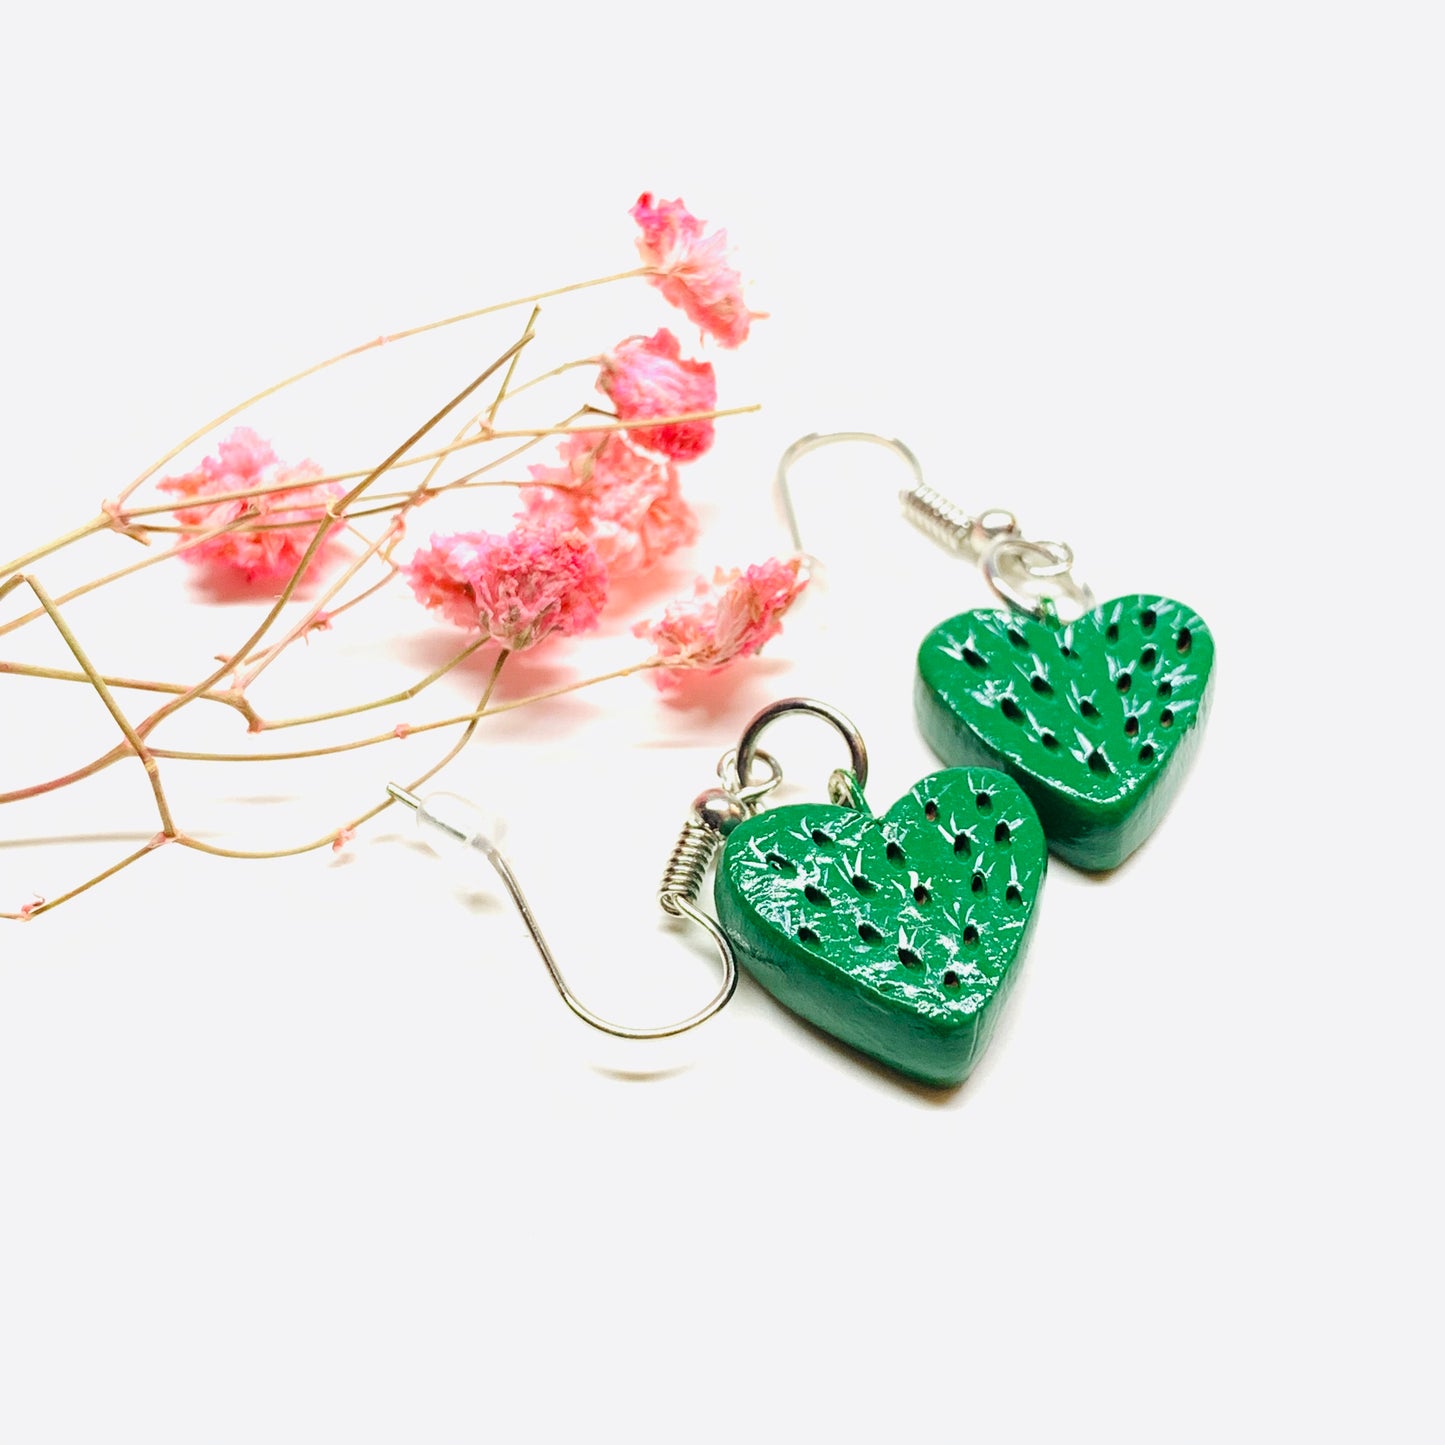 Carved Hand painted and handmade  heart cactus drop and dangle clay arrings. Mexican jewelry. Aretes de nopal en forma de corazon hechos y pintados a mano. Mexico folk art to wear. Food jewelry accessories by Fridamaniacs: Frida Kahlo inspired 